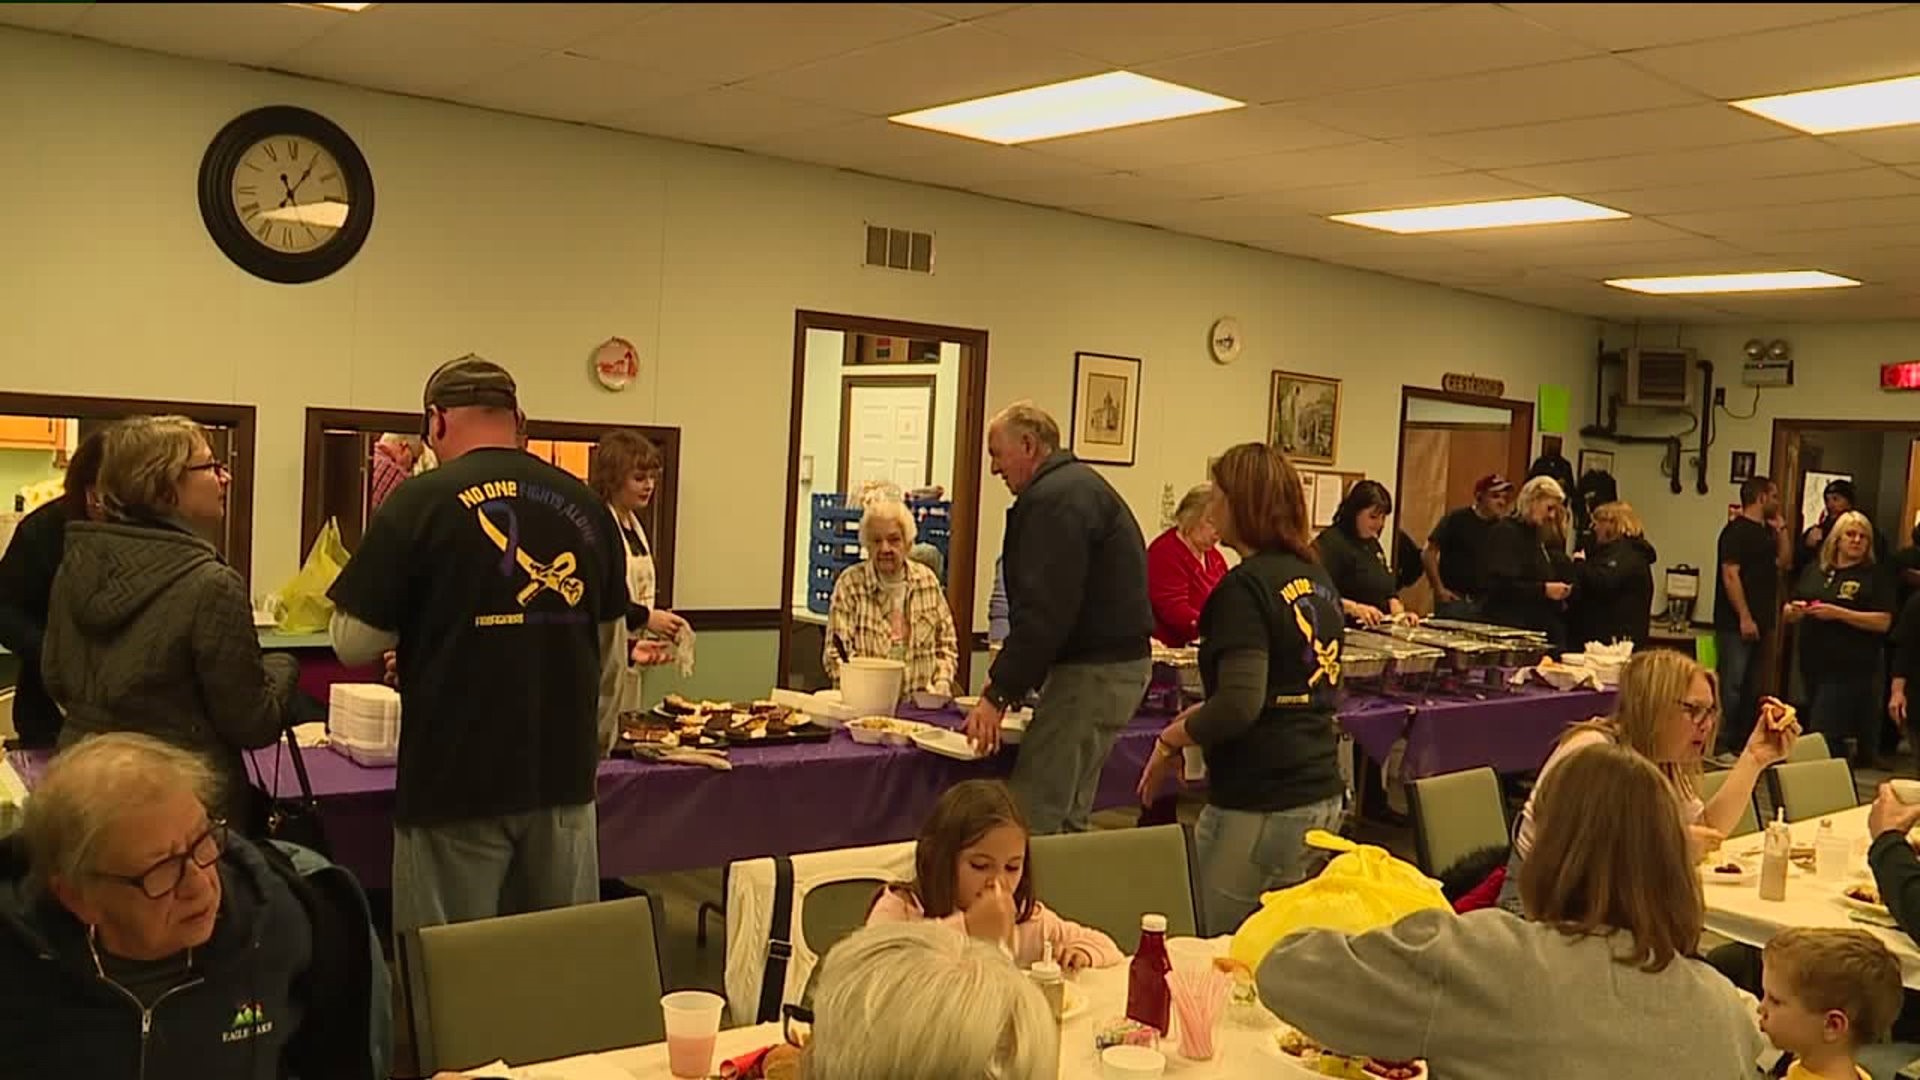 Wurst Dinner Ever Held to Benefit Lackawanna County Fire Chief